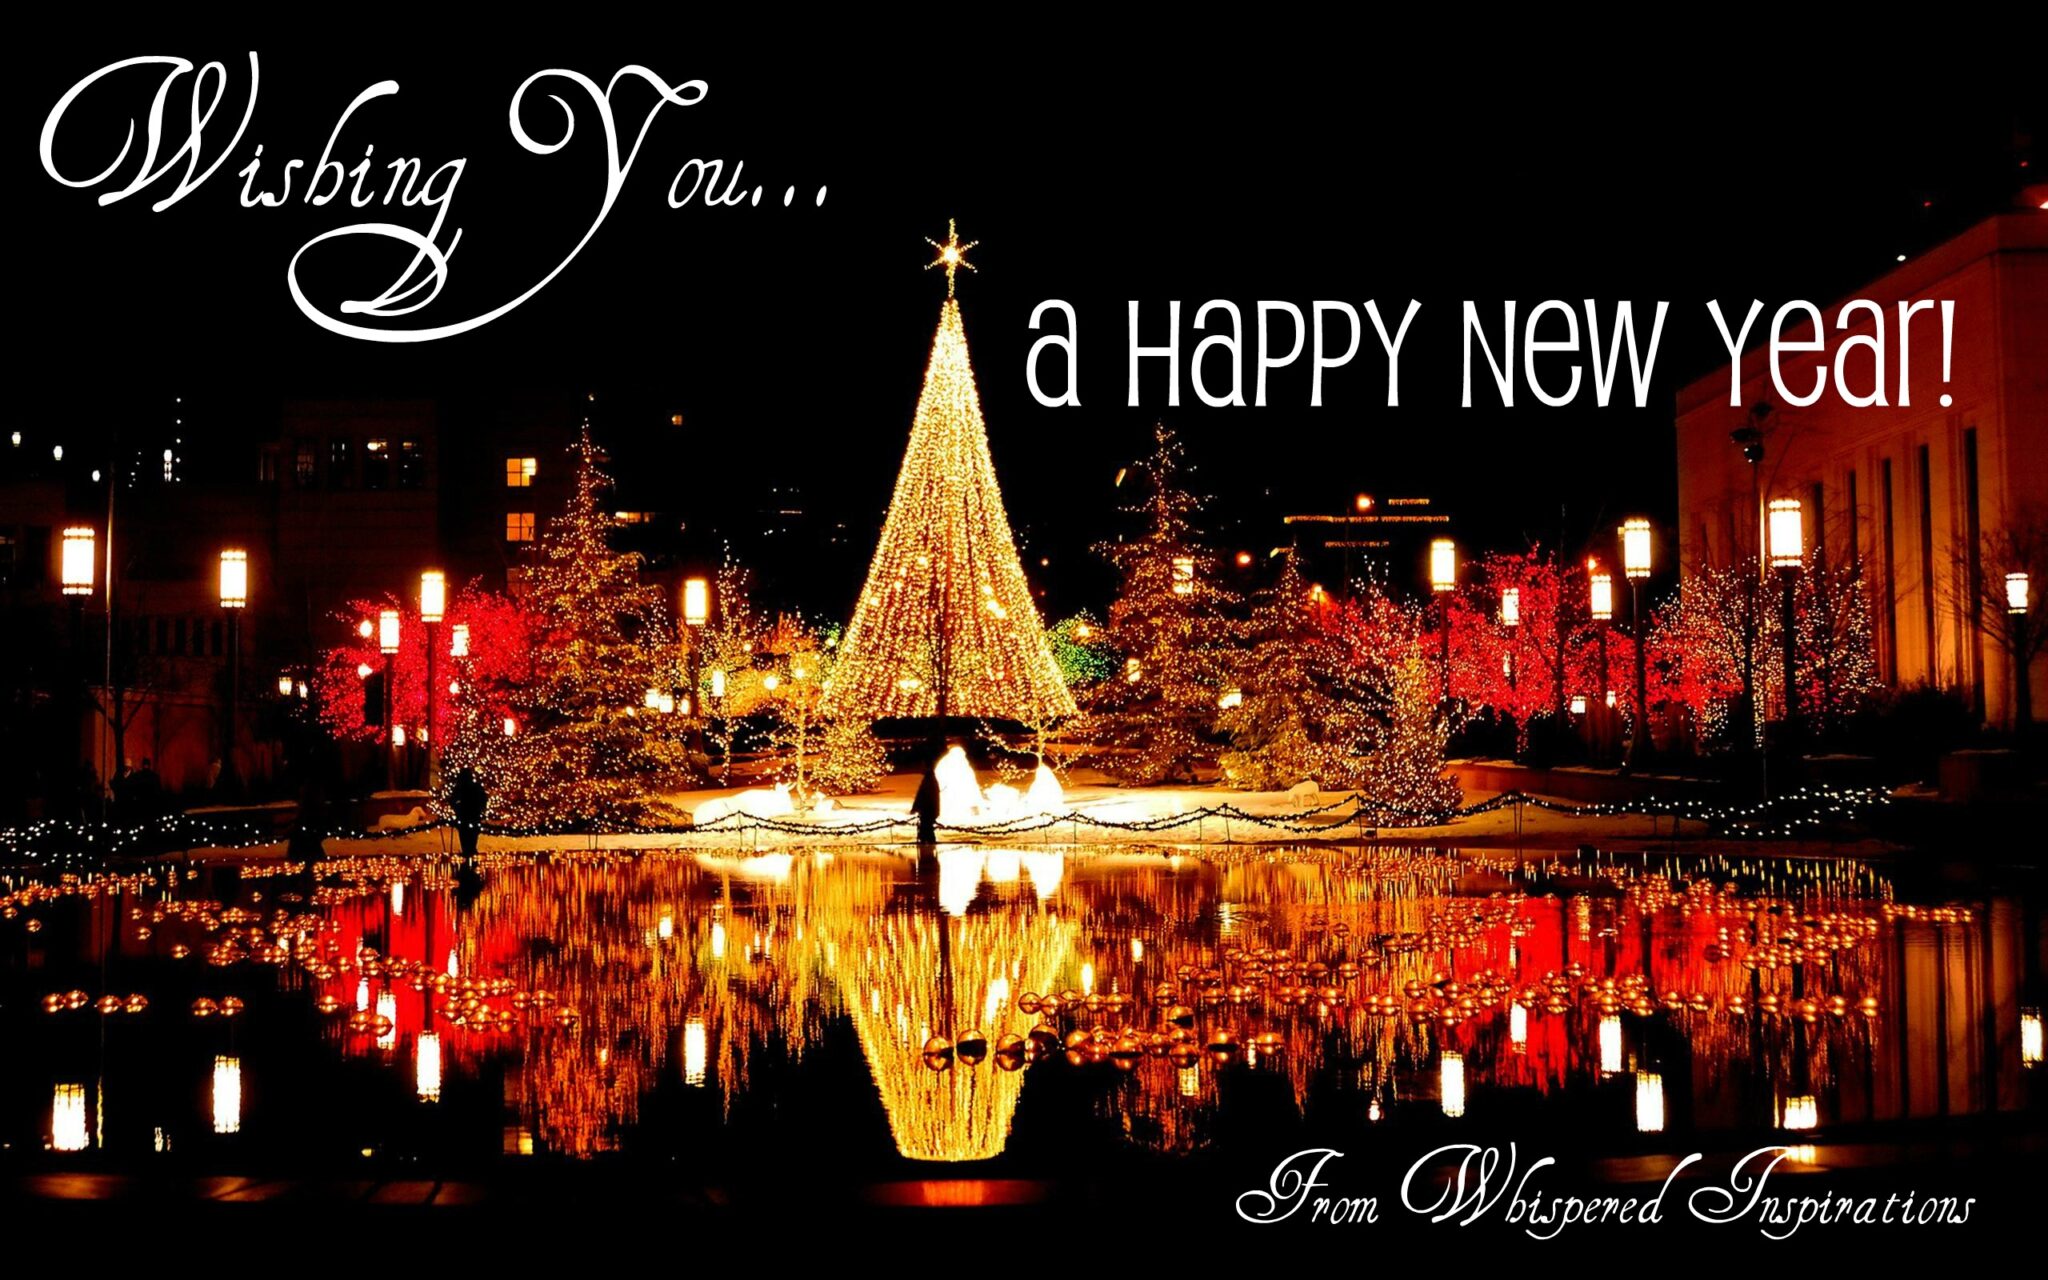 Wishing You All a Blessed & Happy New Year